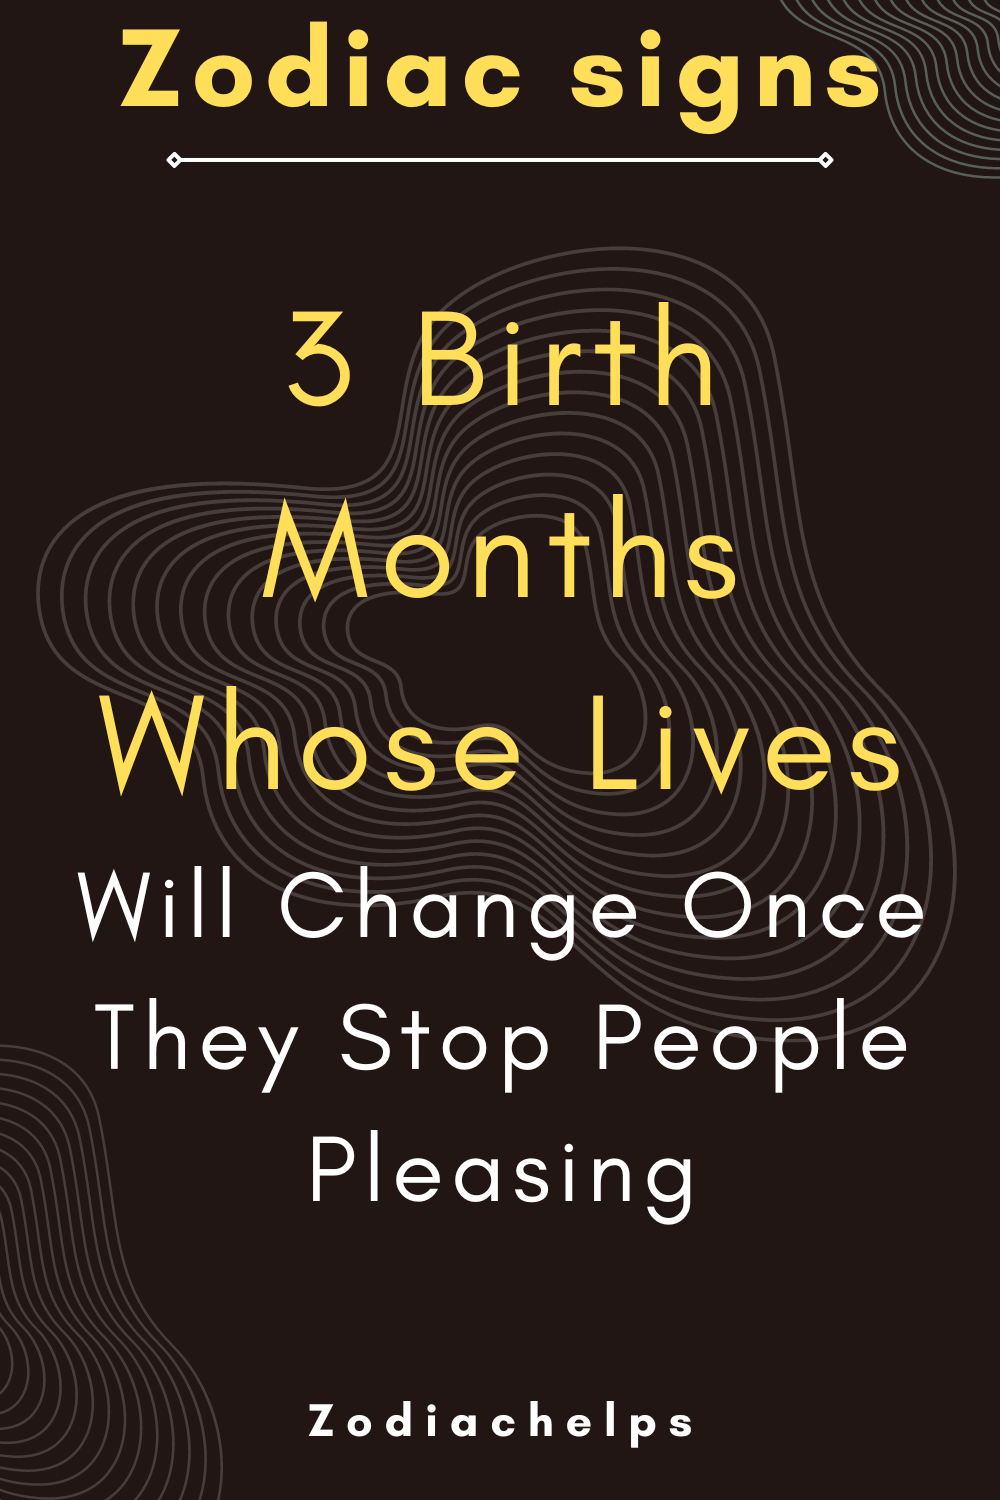 3 Birth Months Whose Lives Will Change Once They Stop People Pleasing